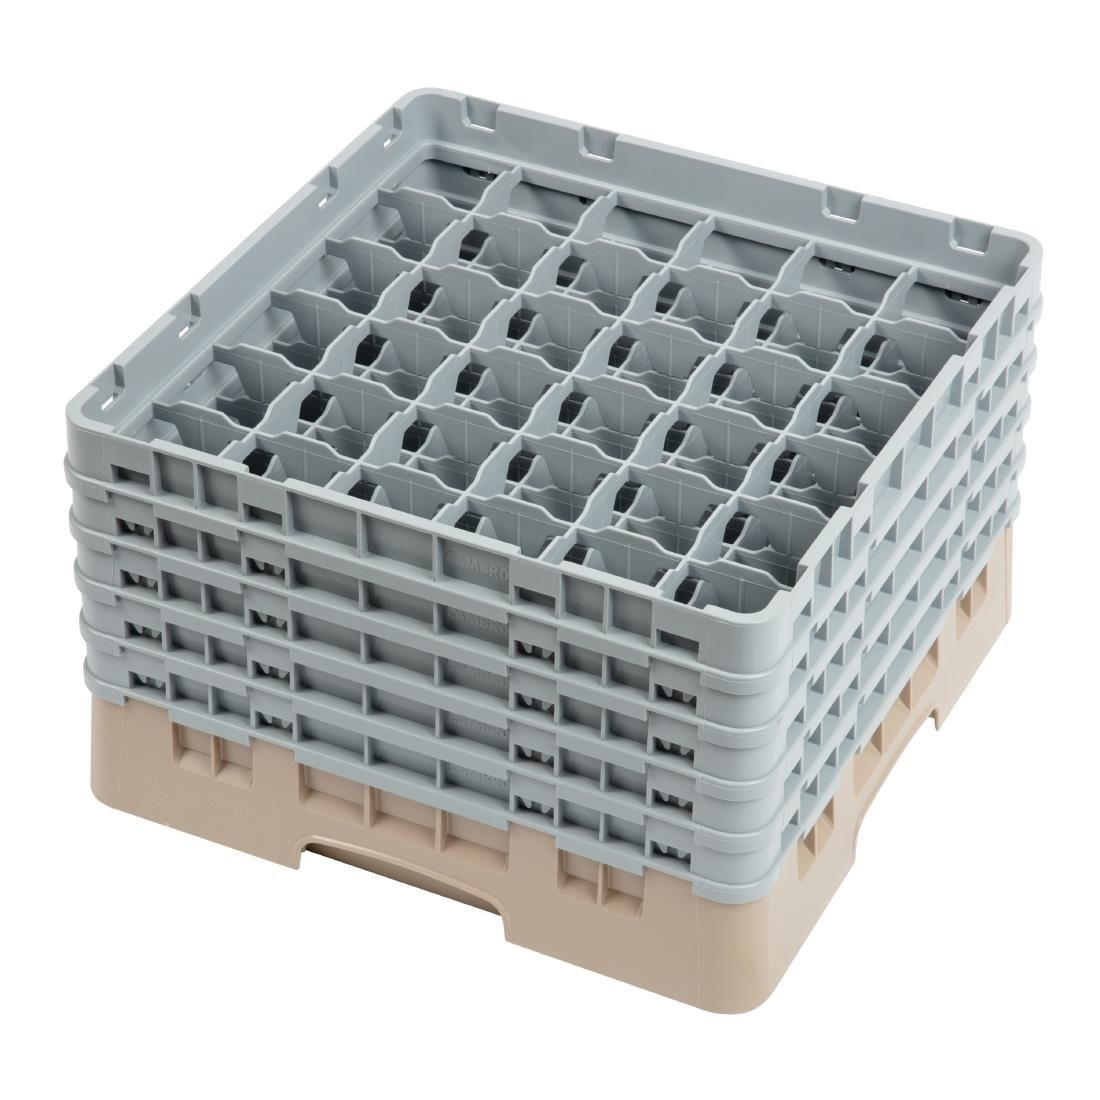 Cambro Camrack Beige 36 Compartments Max Glass Height 257mm JD Catering Equipment Solutions Ltd